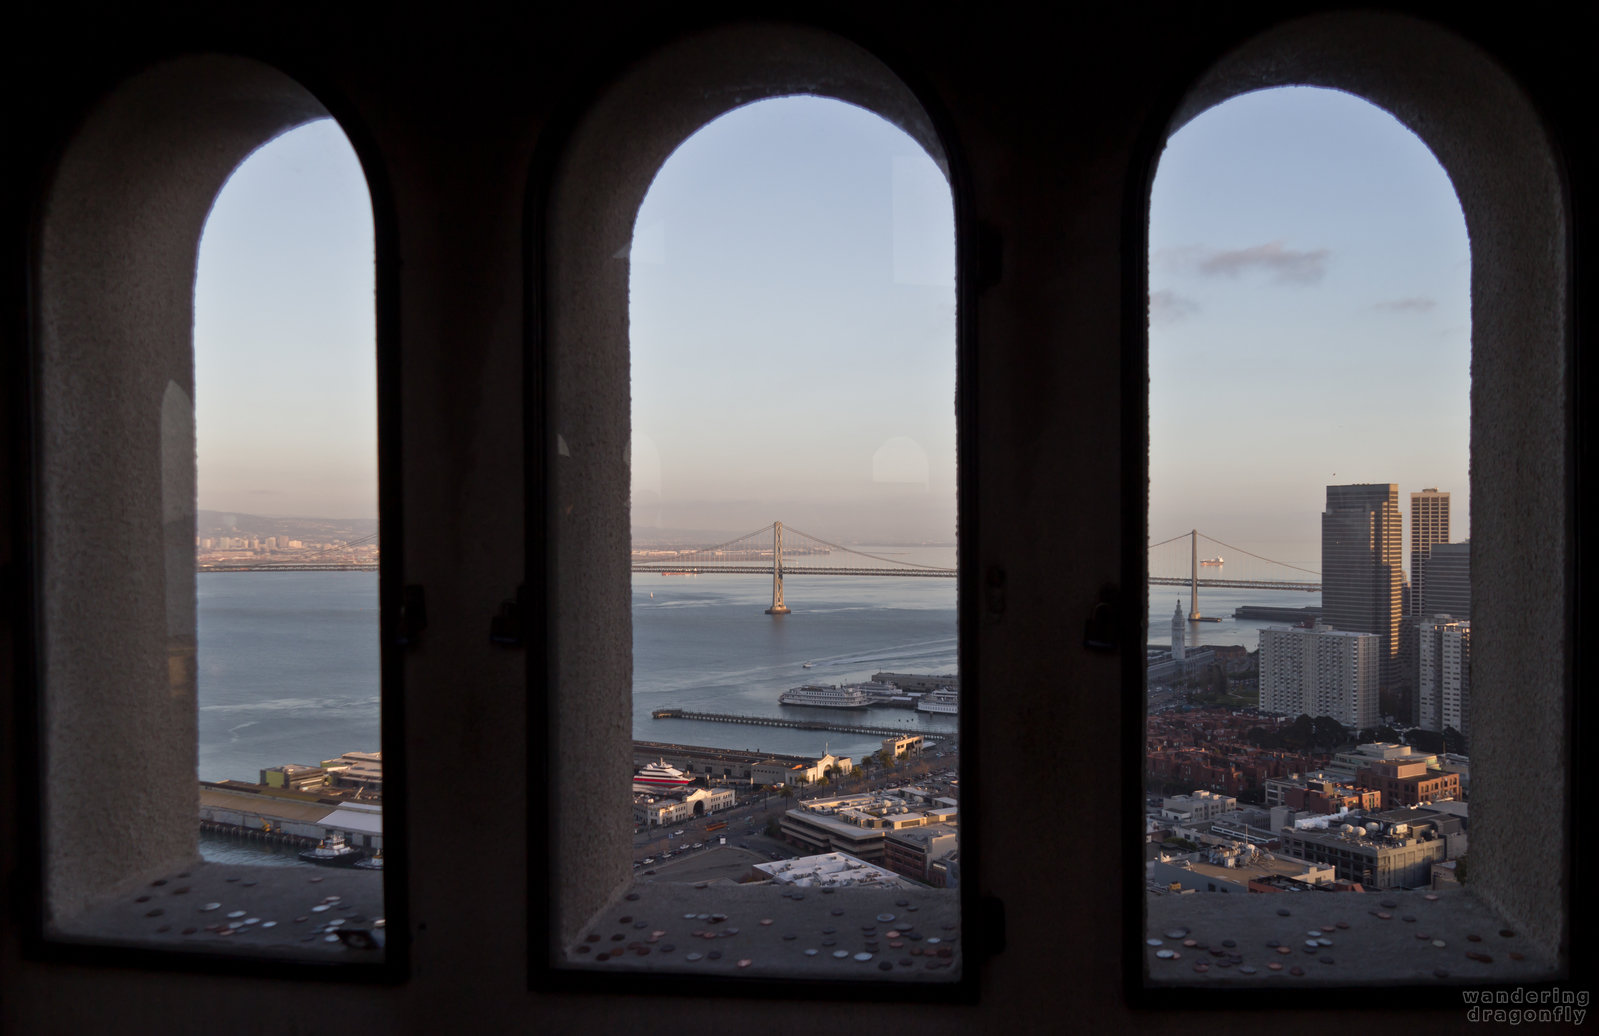 Looking through the windows of Coit Tower at the Bay Bridge -- building, vista